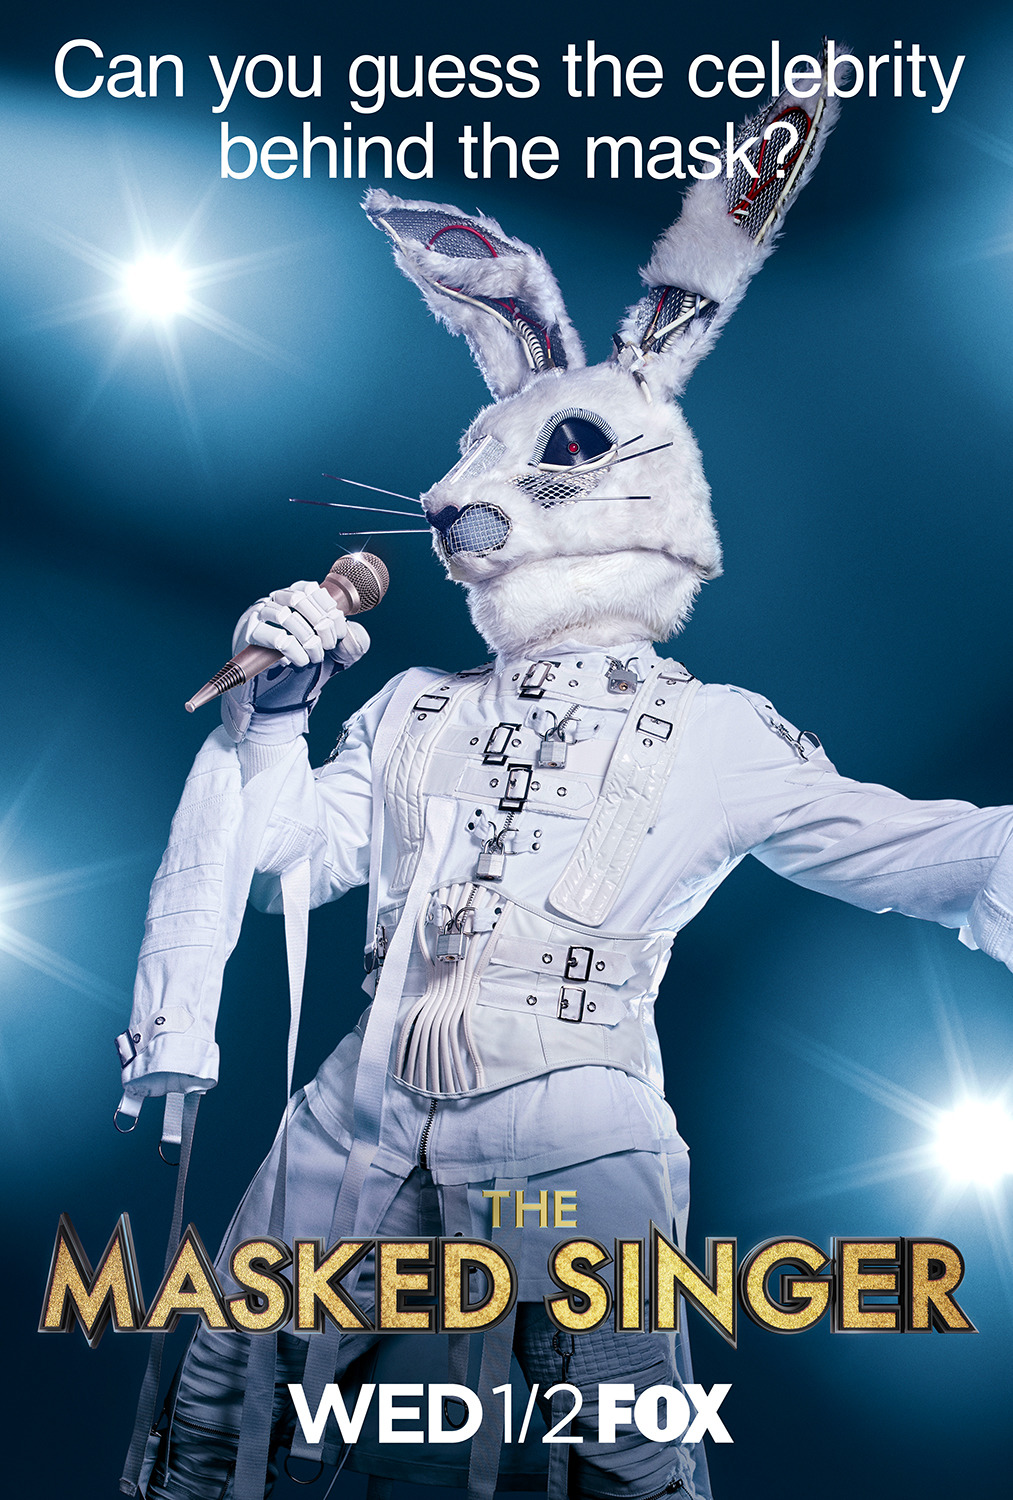 Extra Large TV Poster Image for The Masked Singer (#4 of 17)